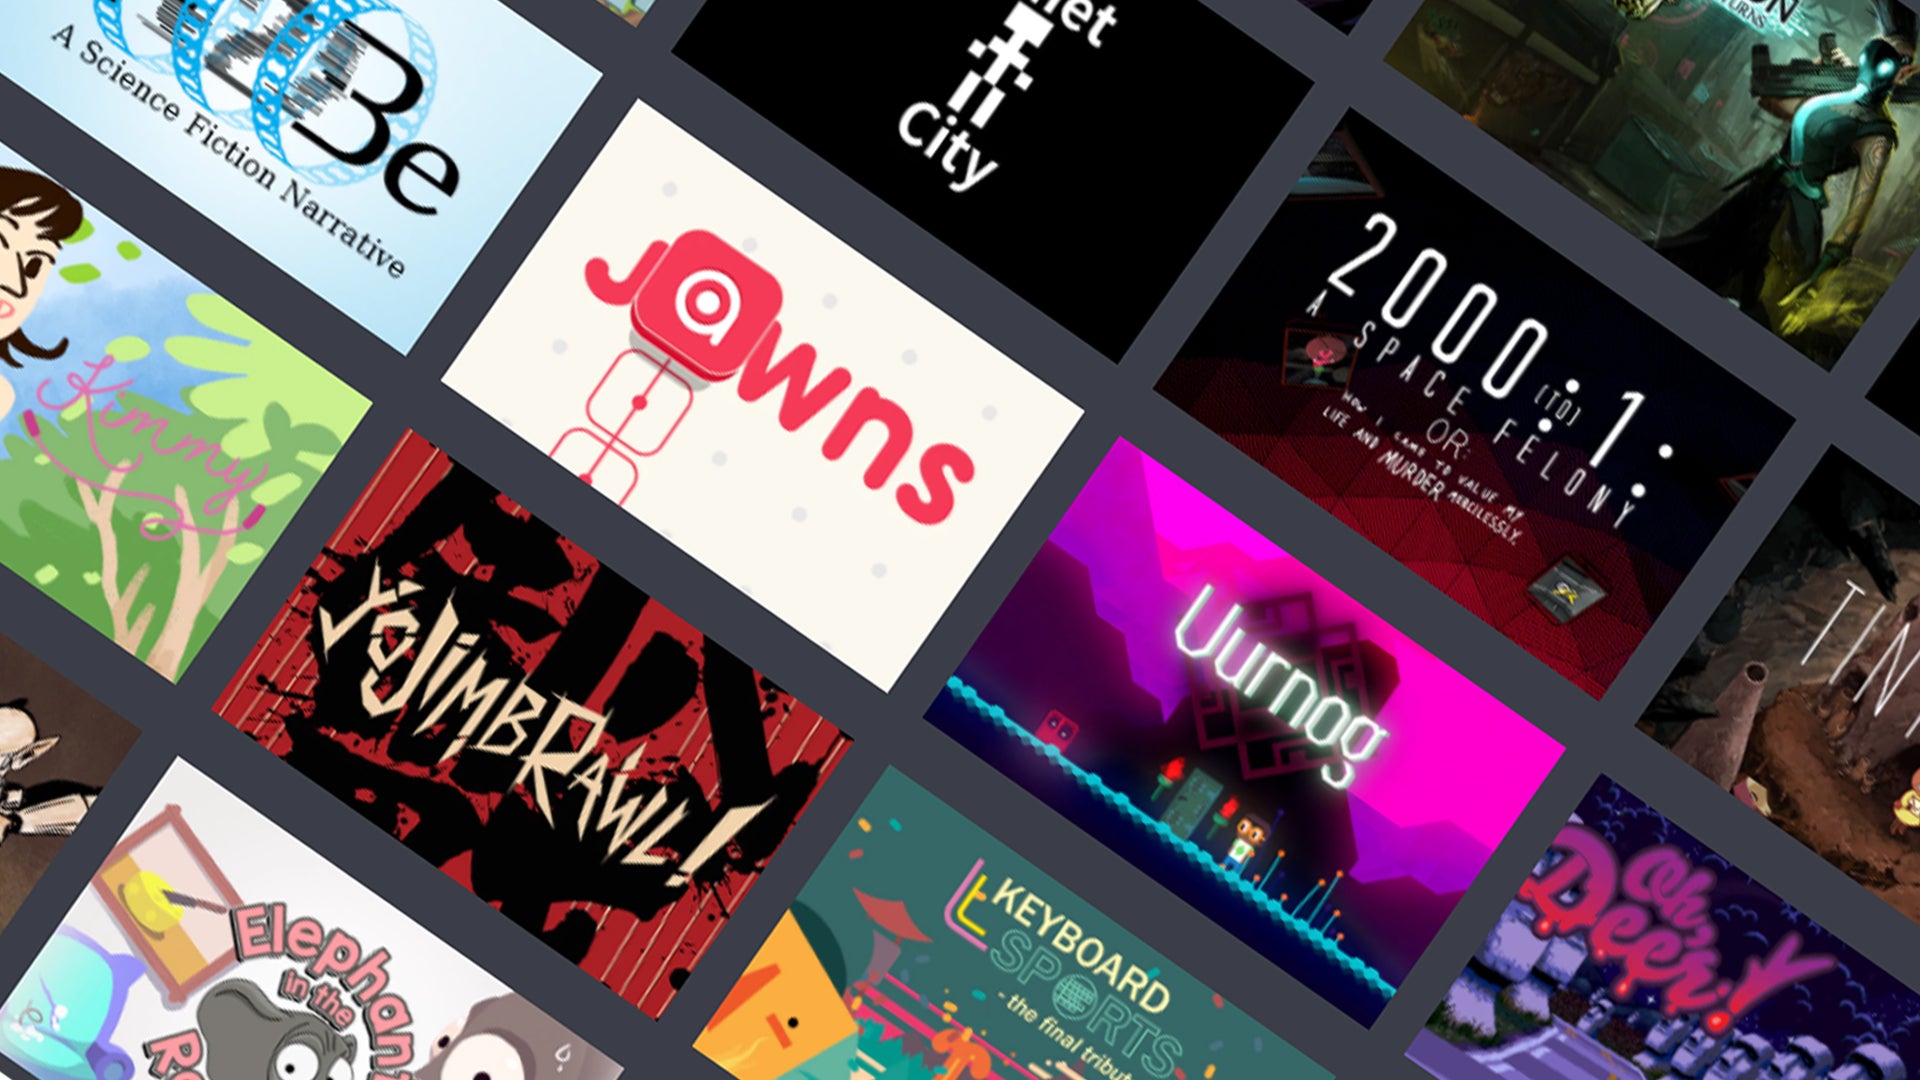 Image for Humble adds Limbo, Gone Home, Shadowrun Returns, and more to its Trove line up